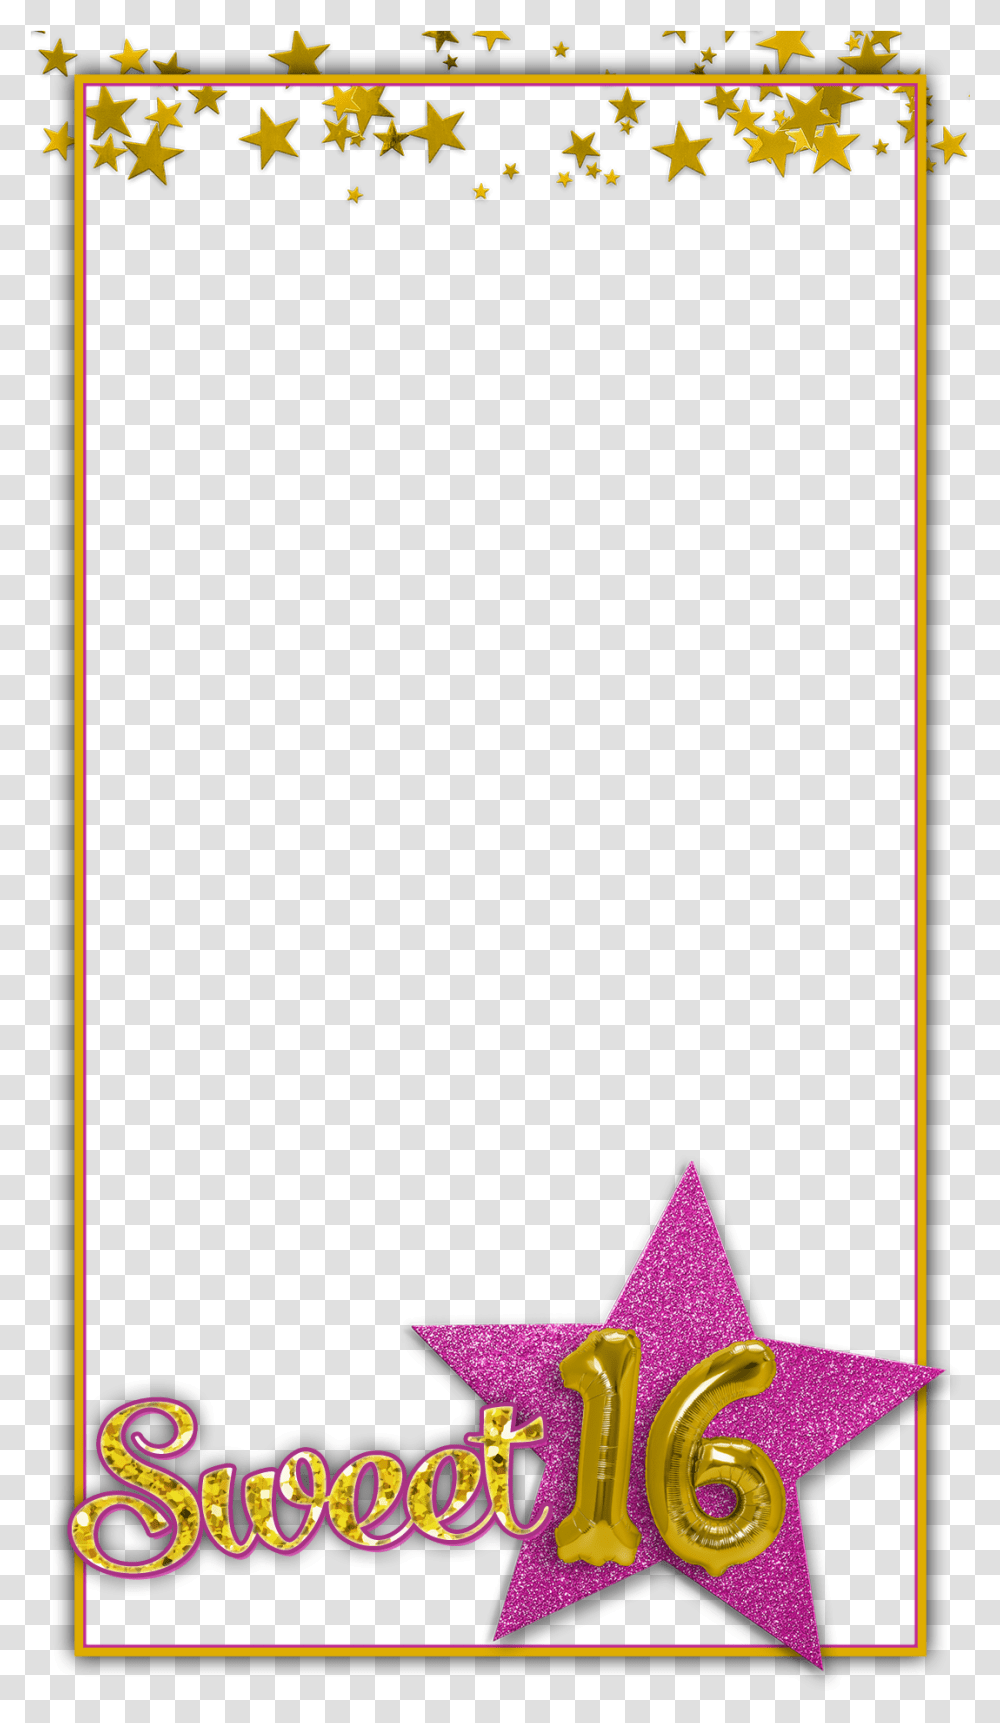 Snapchat Filters Sweet 16 Picsart Sweet 16 Snapchat Filter, Poster, Triangle Transparent Png